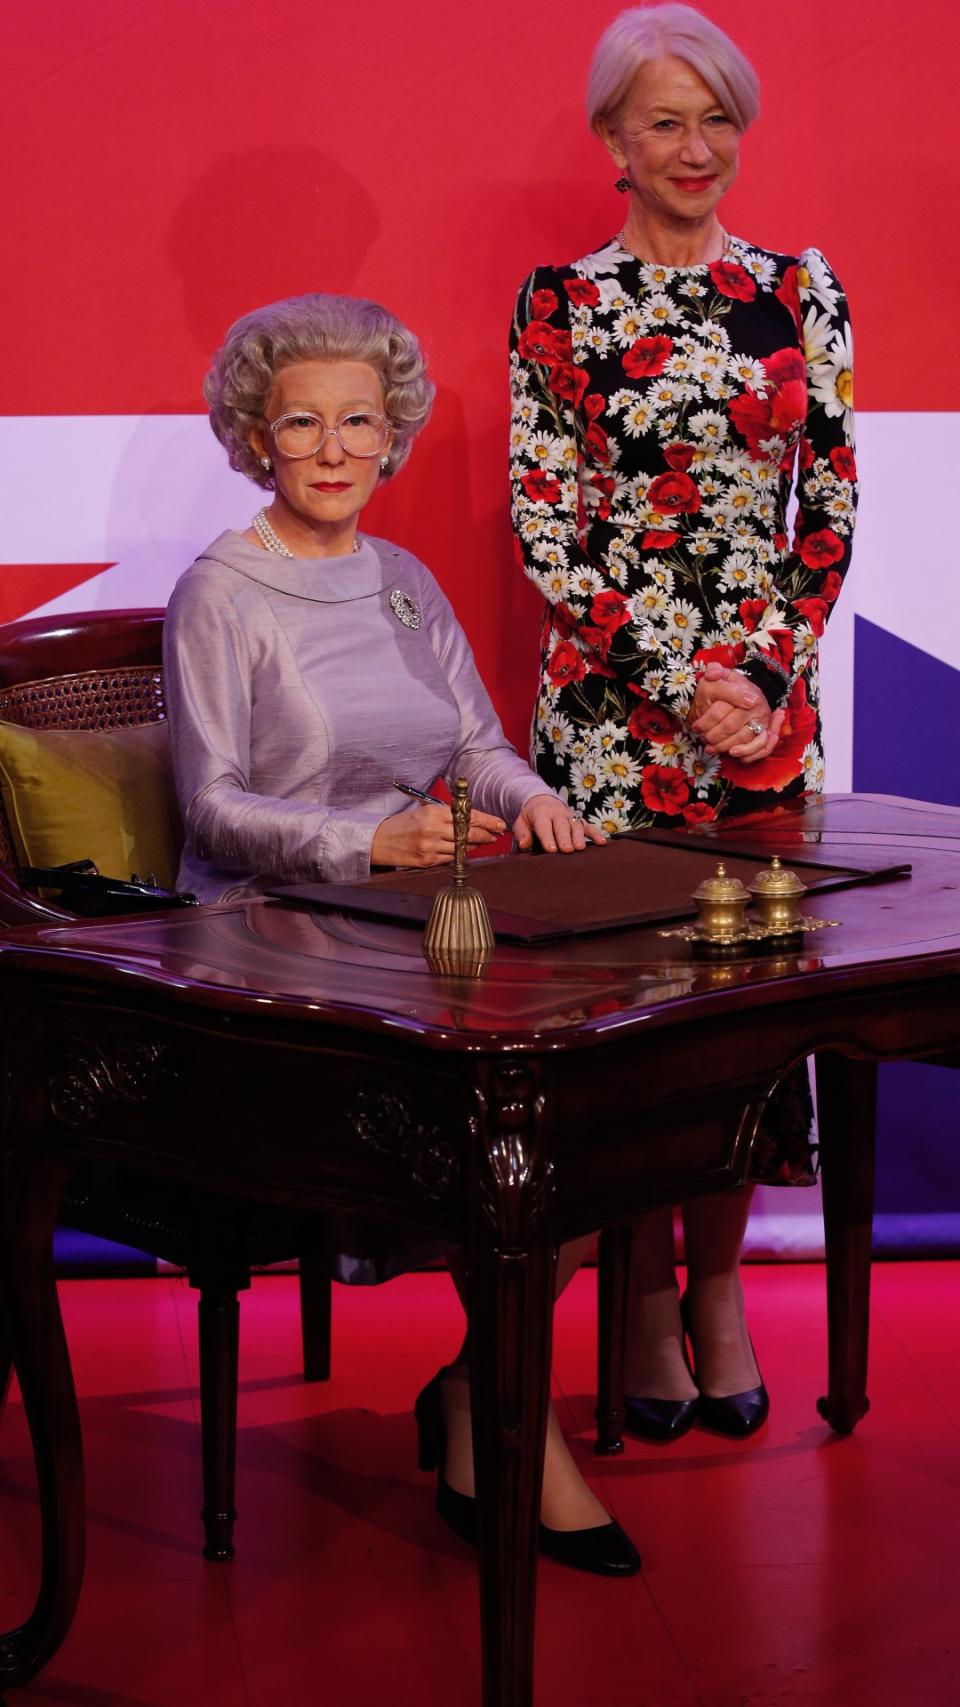 <p> Helen Mirren was awarded the Dame Commander of the Order of the British Empire in the 2003 Queen's Birthday Honours List for her services to drama. </p> <p> Of course, a few years later, she’d go on to play the late Queen Elizabeth in the movie, The Queen. </p> <p> Interestingly, Dame Helen's opinions towards the monarchy might have changed over time, as she rejected the offer of a CBE in 1996. </p>